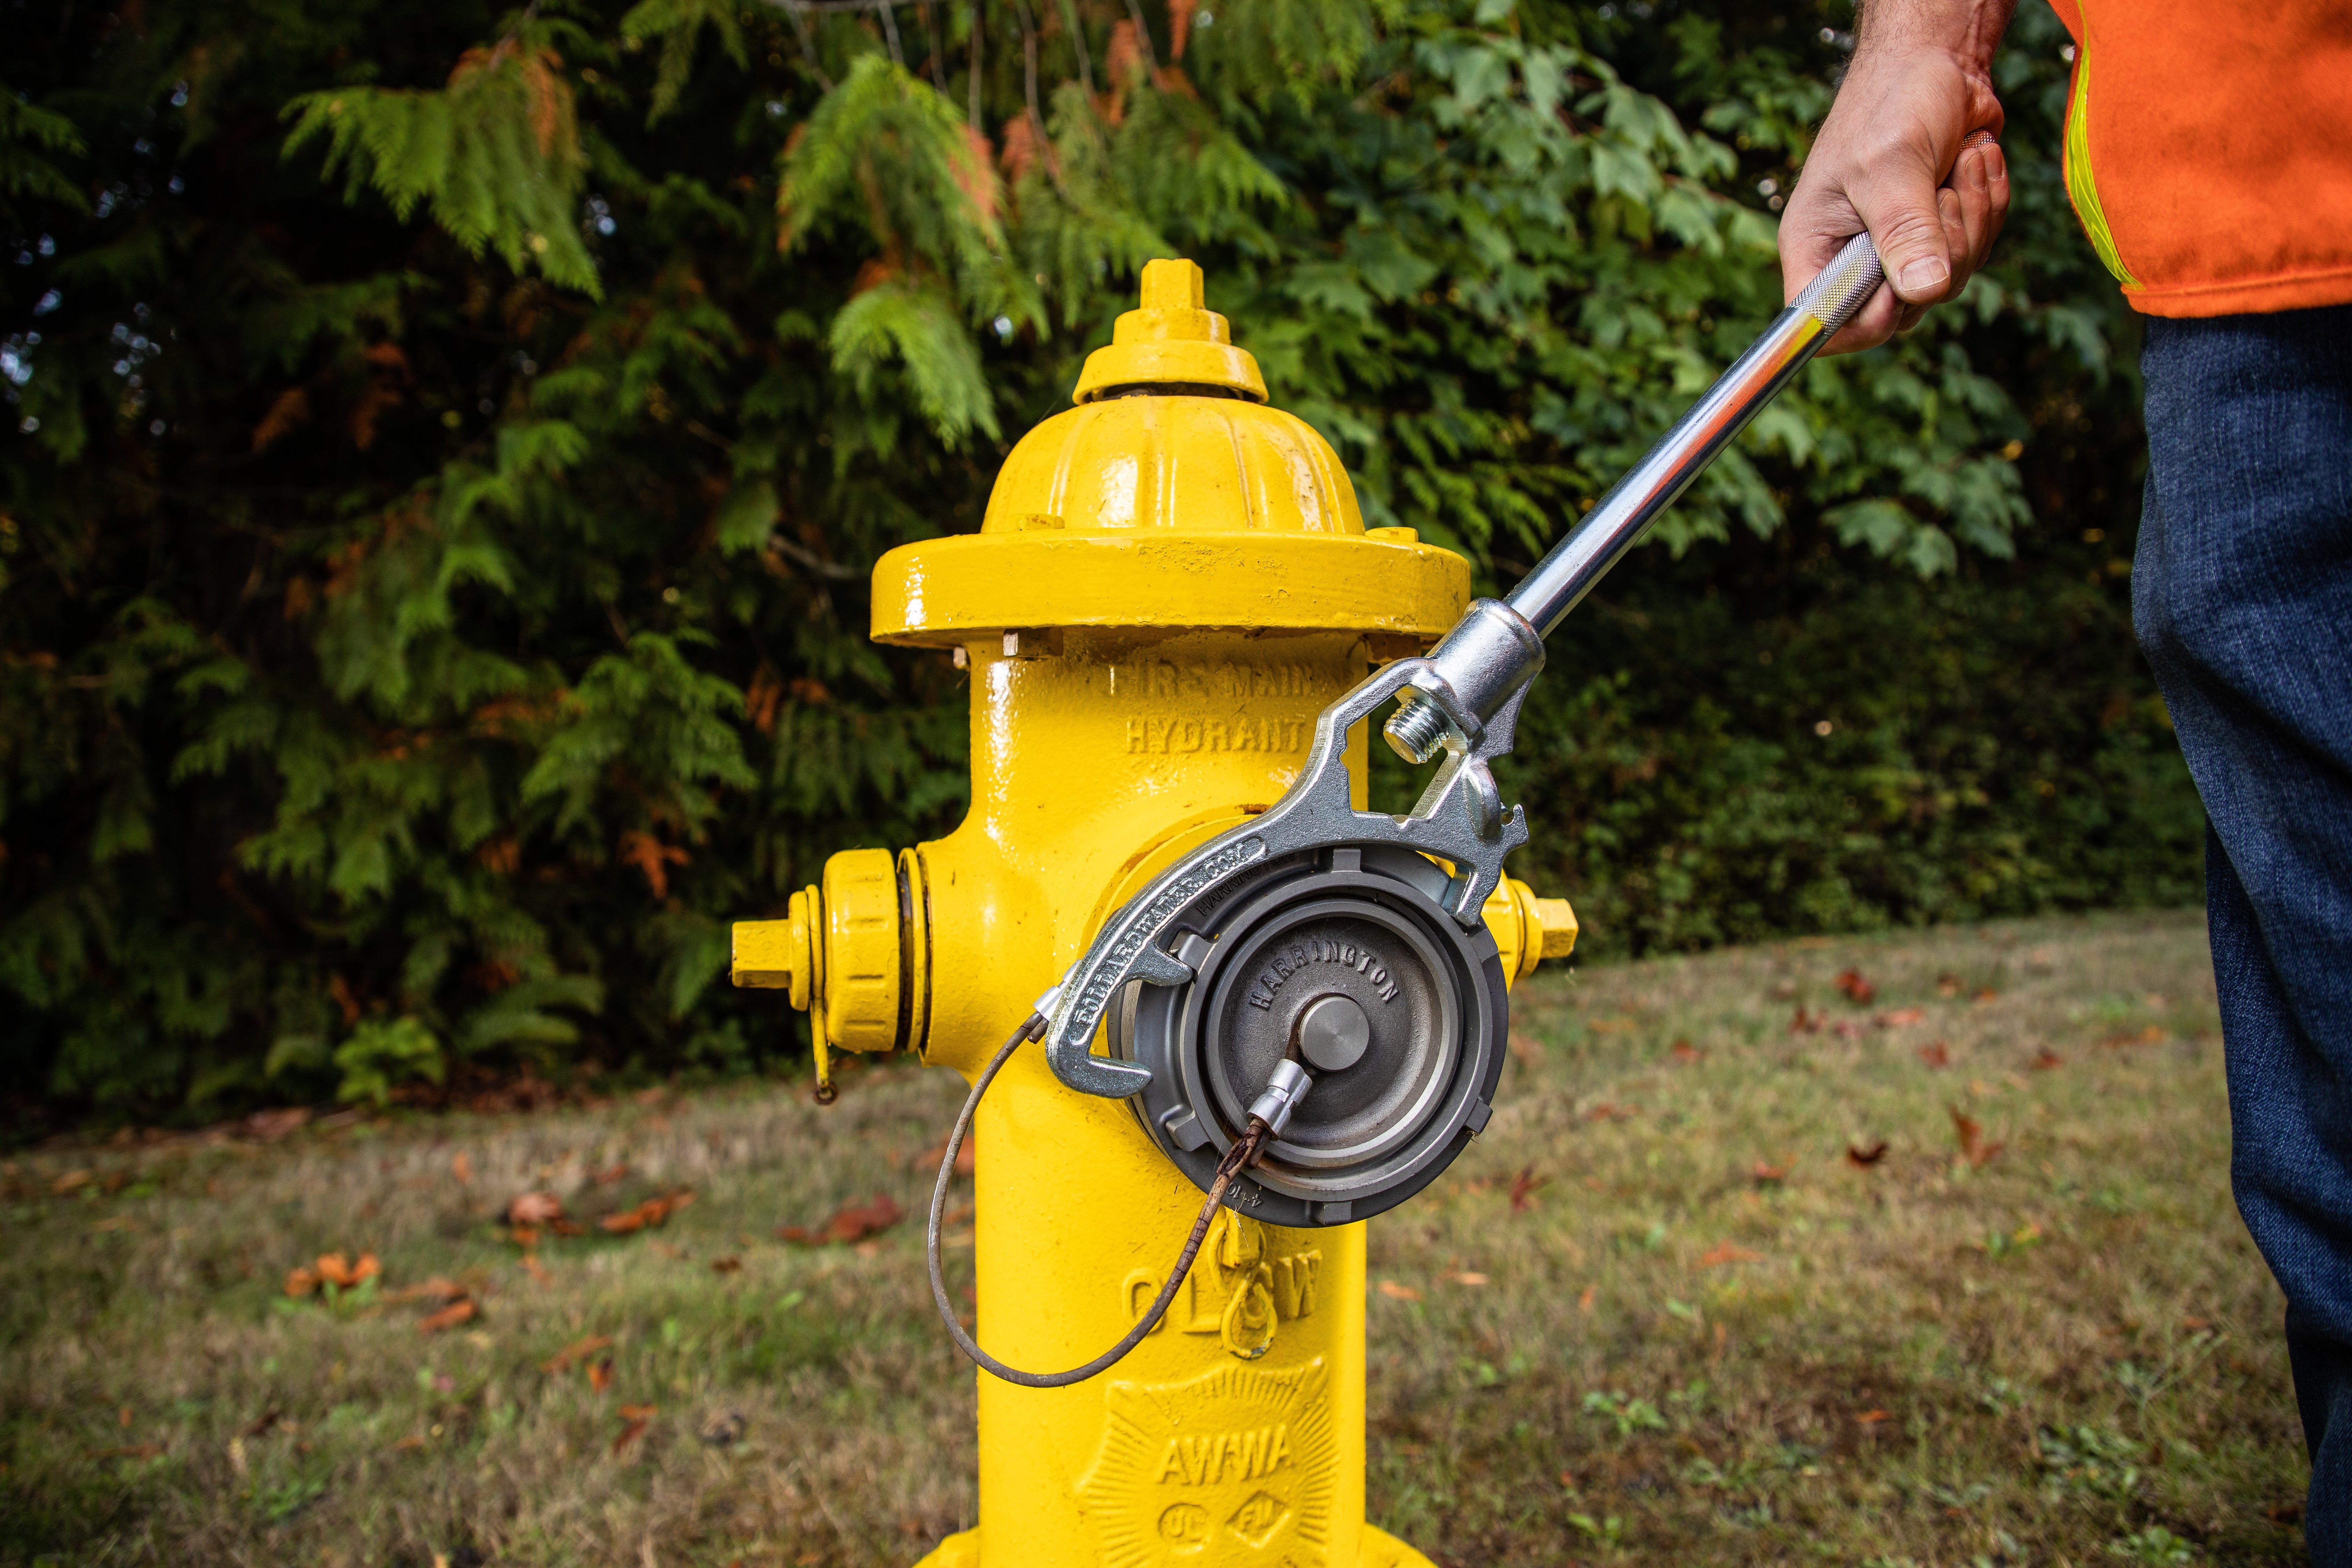 A worker wearing an orange reflective vest uses a wrench to tighten a yellow fire hydrant.